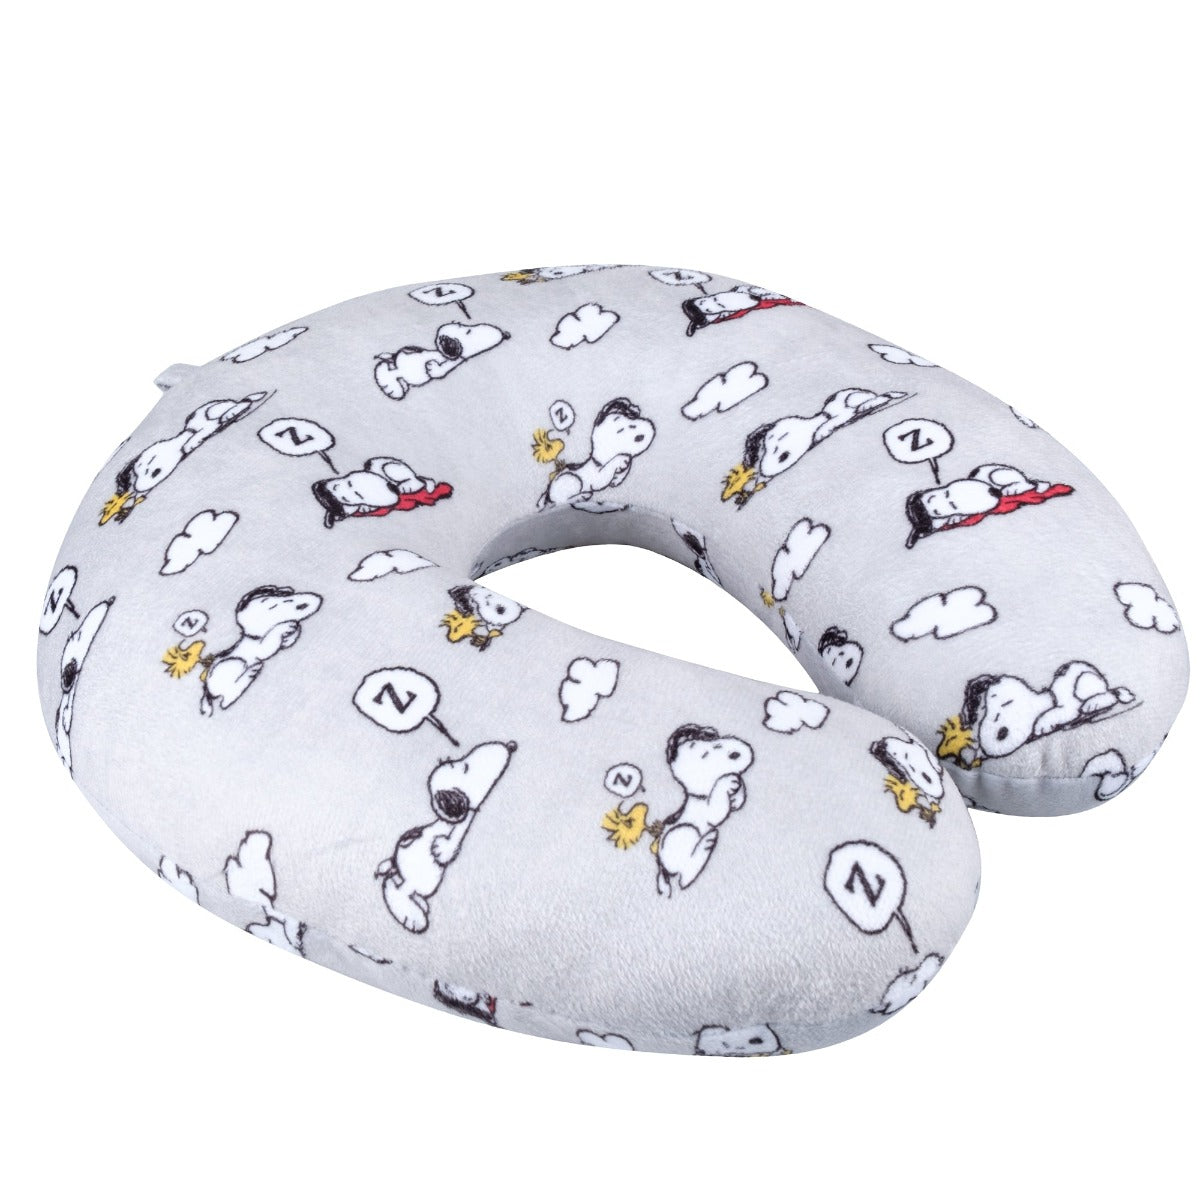 Ful peanuts snoopy woodstock clouds travel neck pillow